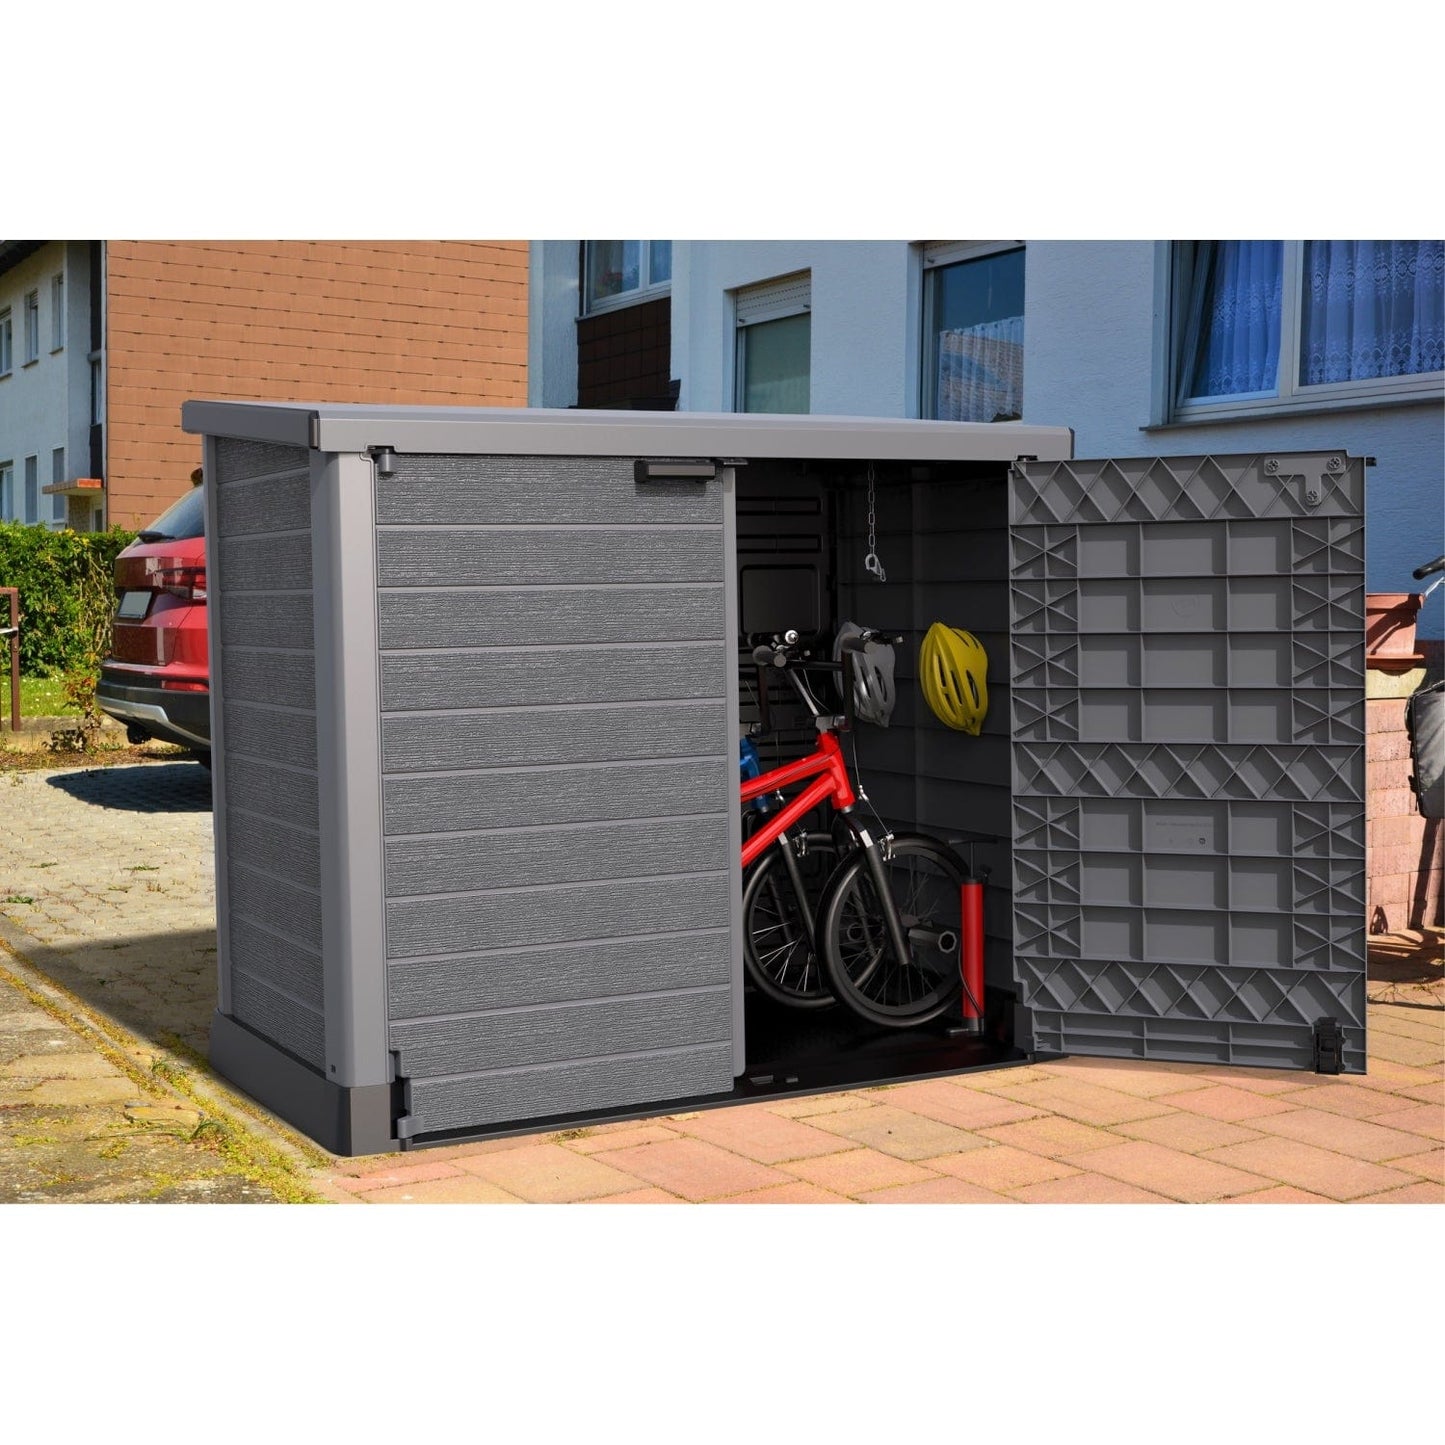 Duramax shed cabinet DuraMax | Heavy Plastic StoreAway Multipurpose Horizontal Shed with Flat Lid - 1200L - Gray 86630